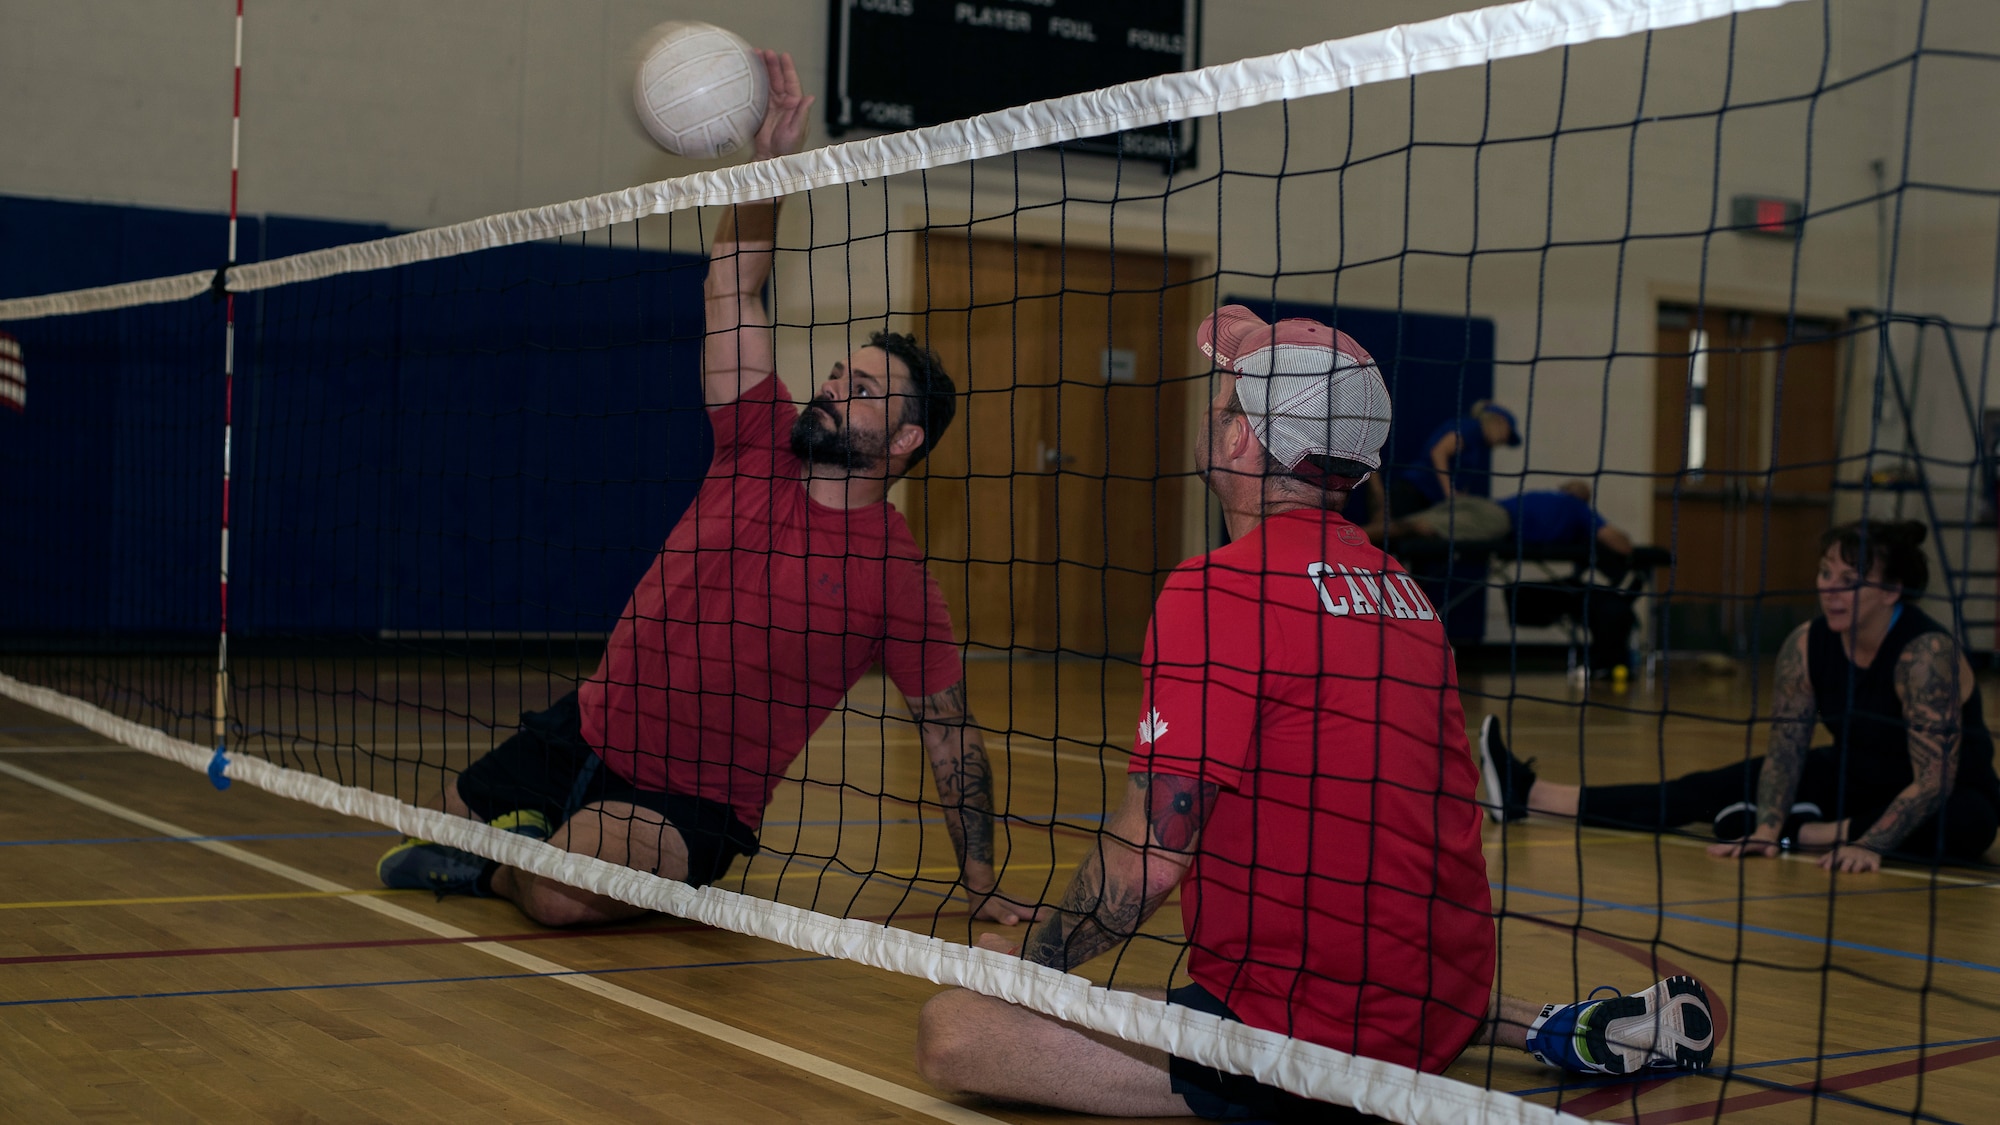 Canadian Armed Forces Warrant Officer Damien Pittman and Master Warrant Officer John O’Neill, wounded warrior athletes, practice sitting volleyball at MacDill Air Force Base, Fla., June 19, 2019.